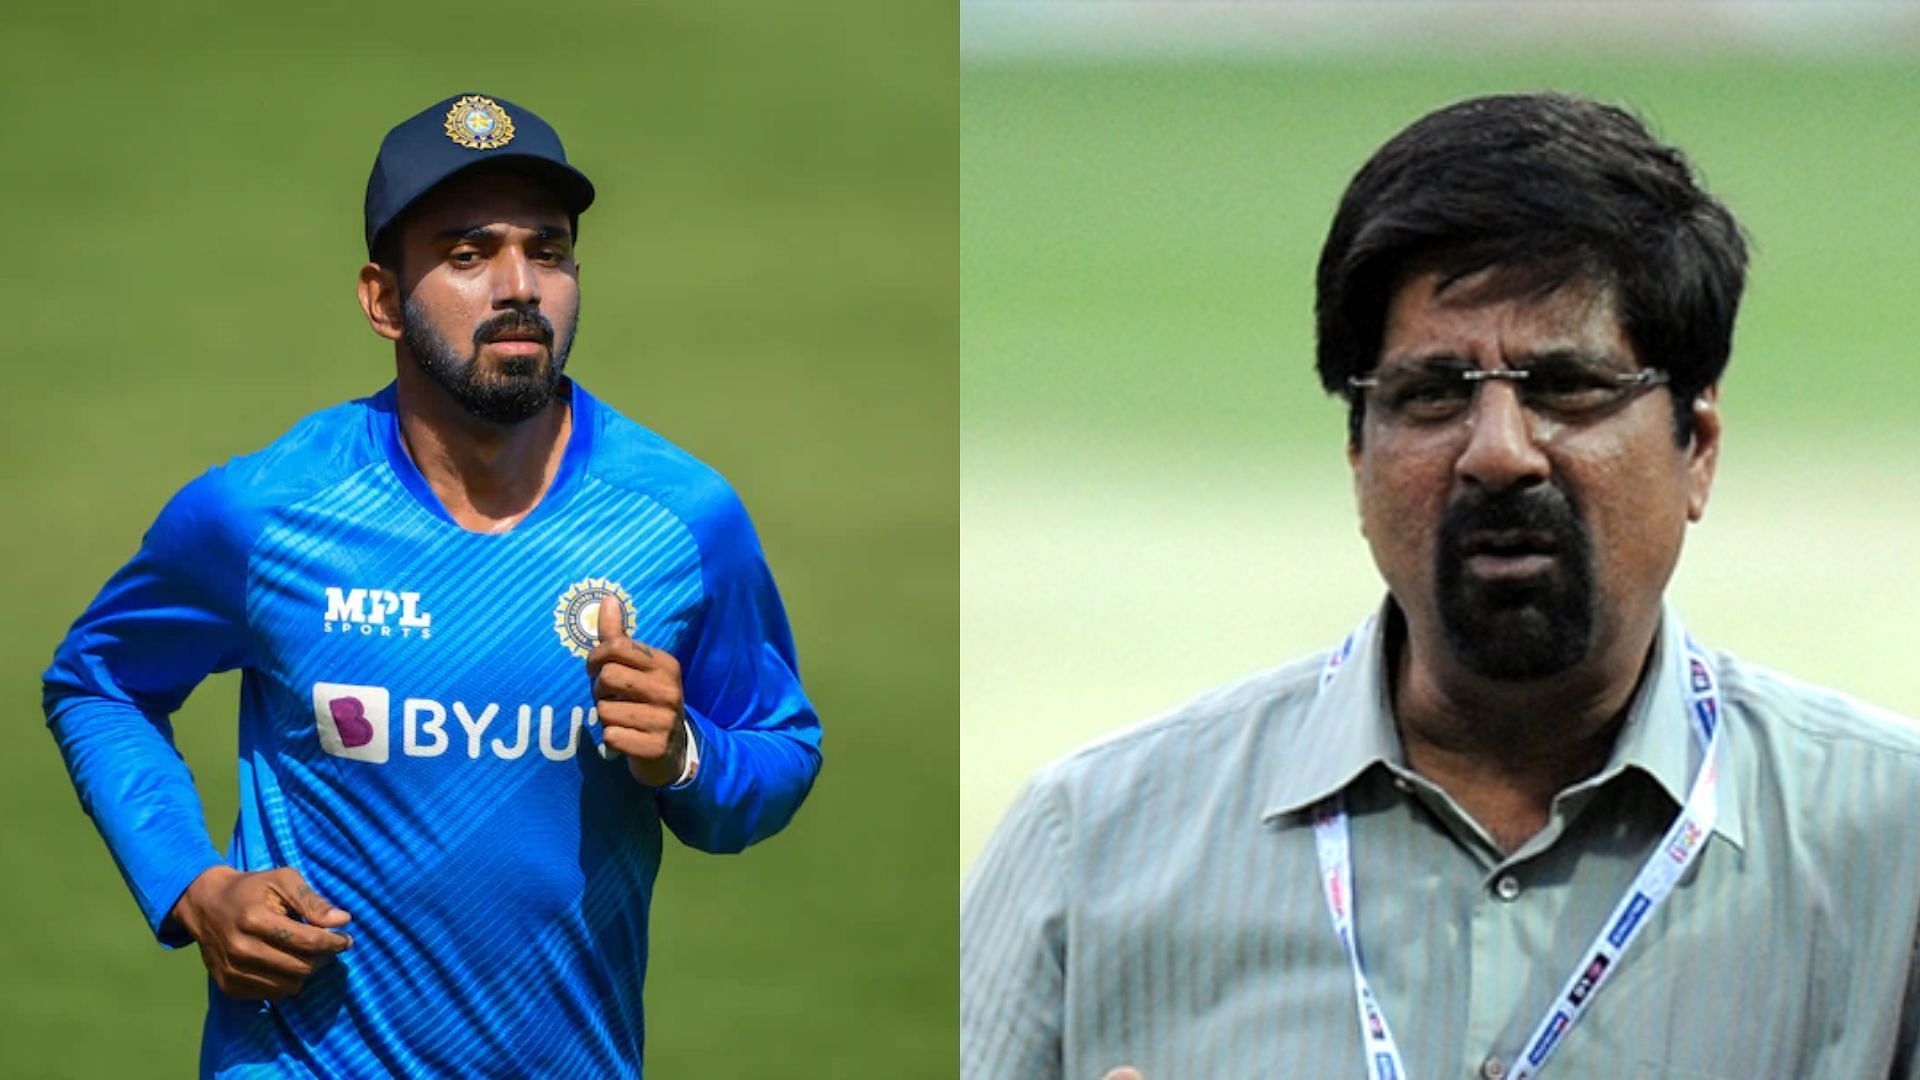 Who said what - top 3 expert reactions to KL Rahul’s niggle ahead of Asia Cup 2023 ft. K Srikkanth